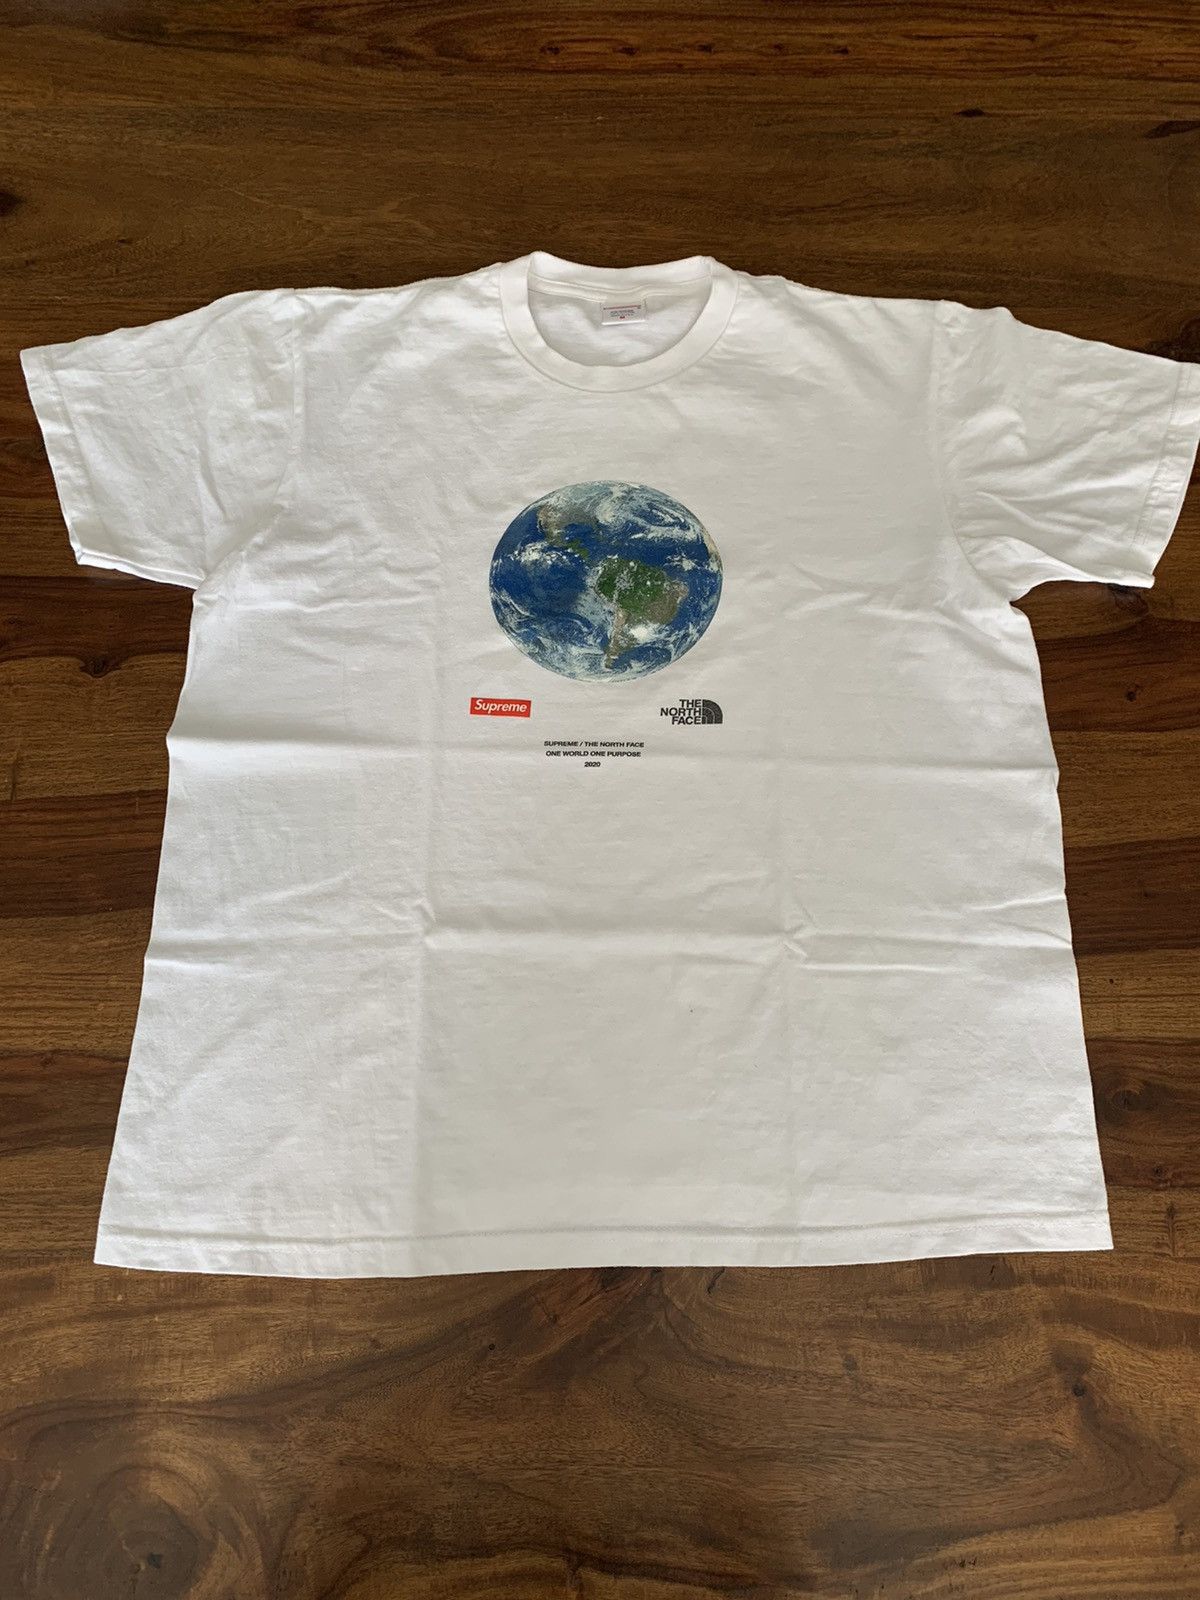 Supreme Supreme x The North Face One World Tee | Grailed